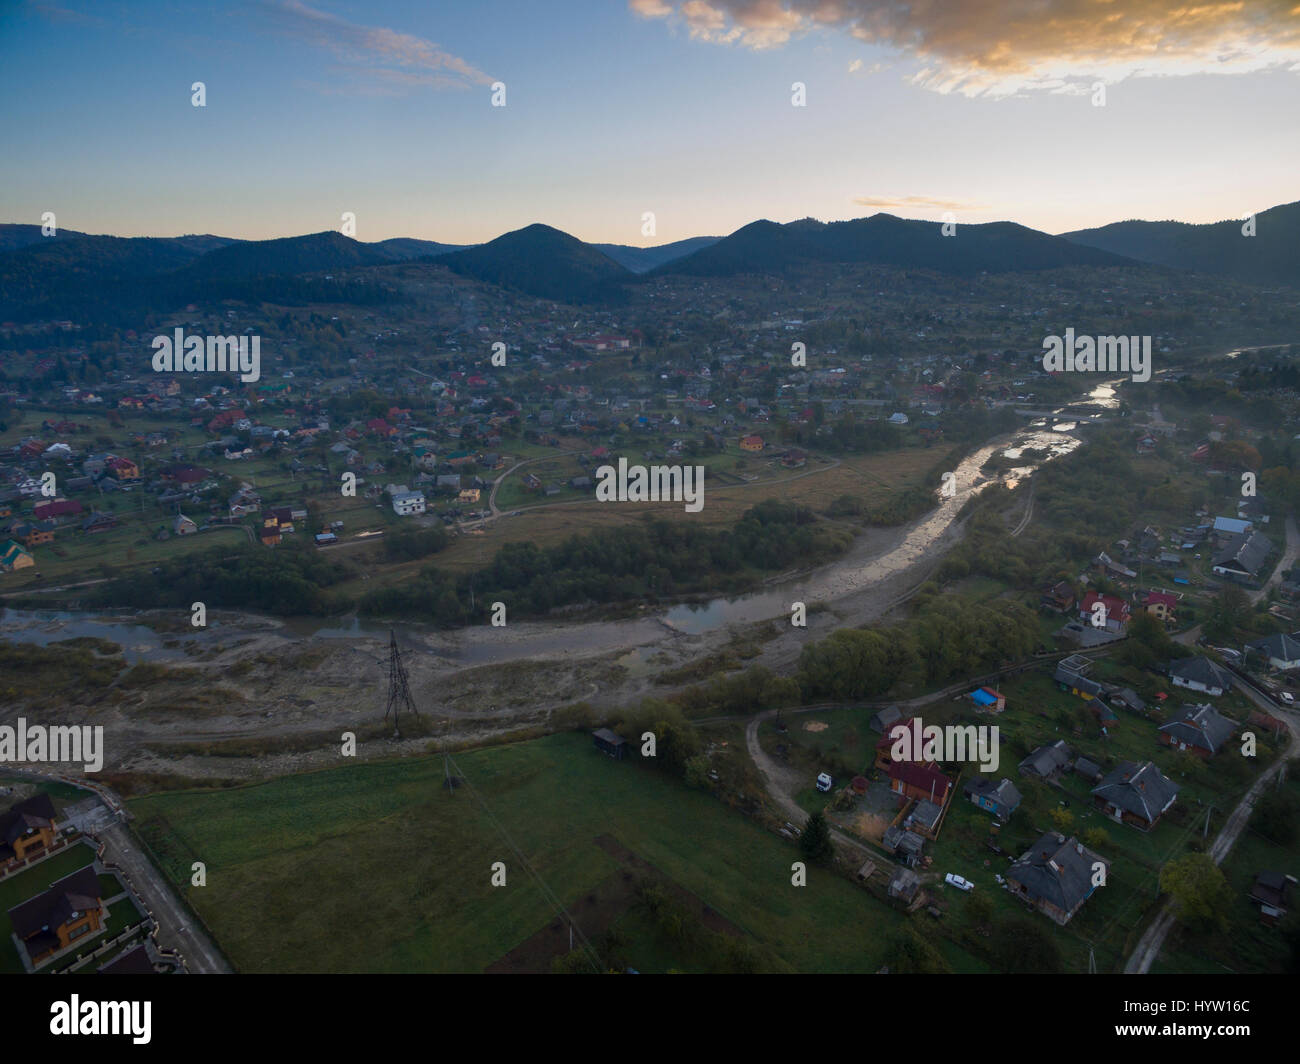 Aerial shot over the village of Mykulychyn in the Carpathian region of Western Ukraine as the sun rises behind distant mountains Stock Photo